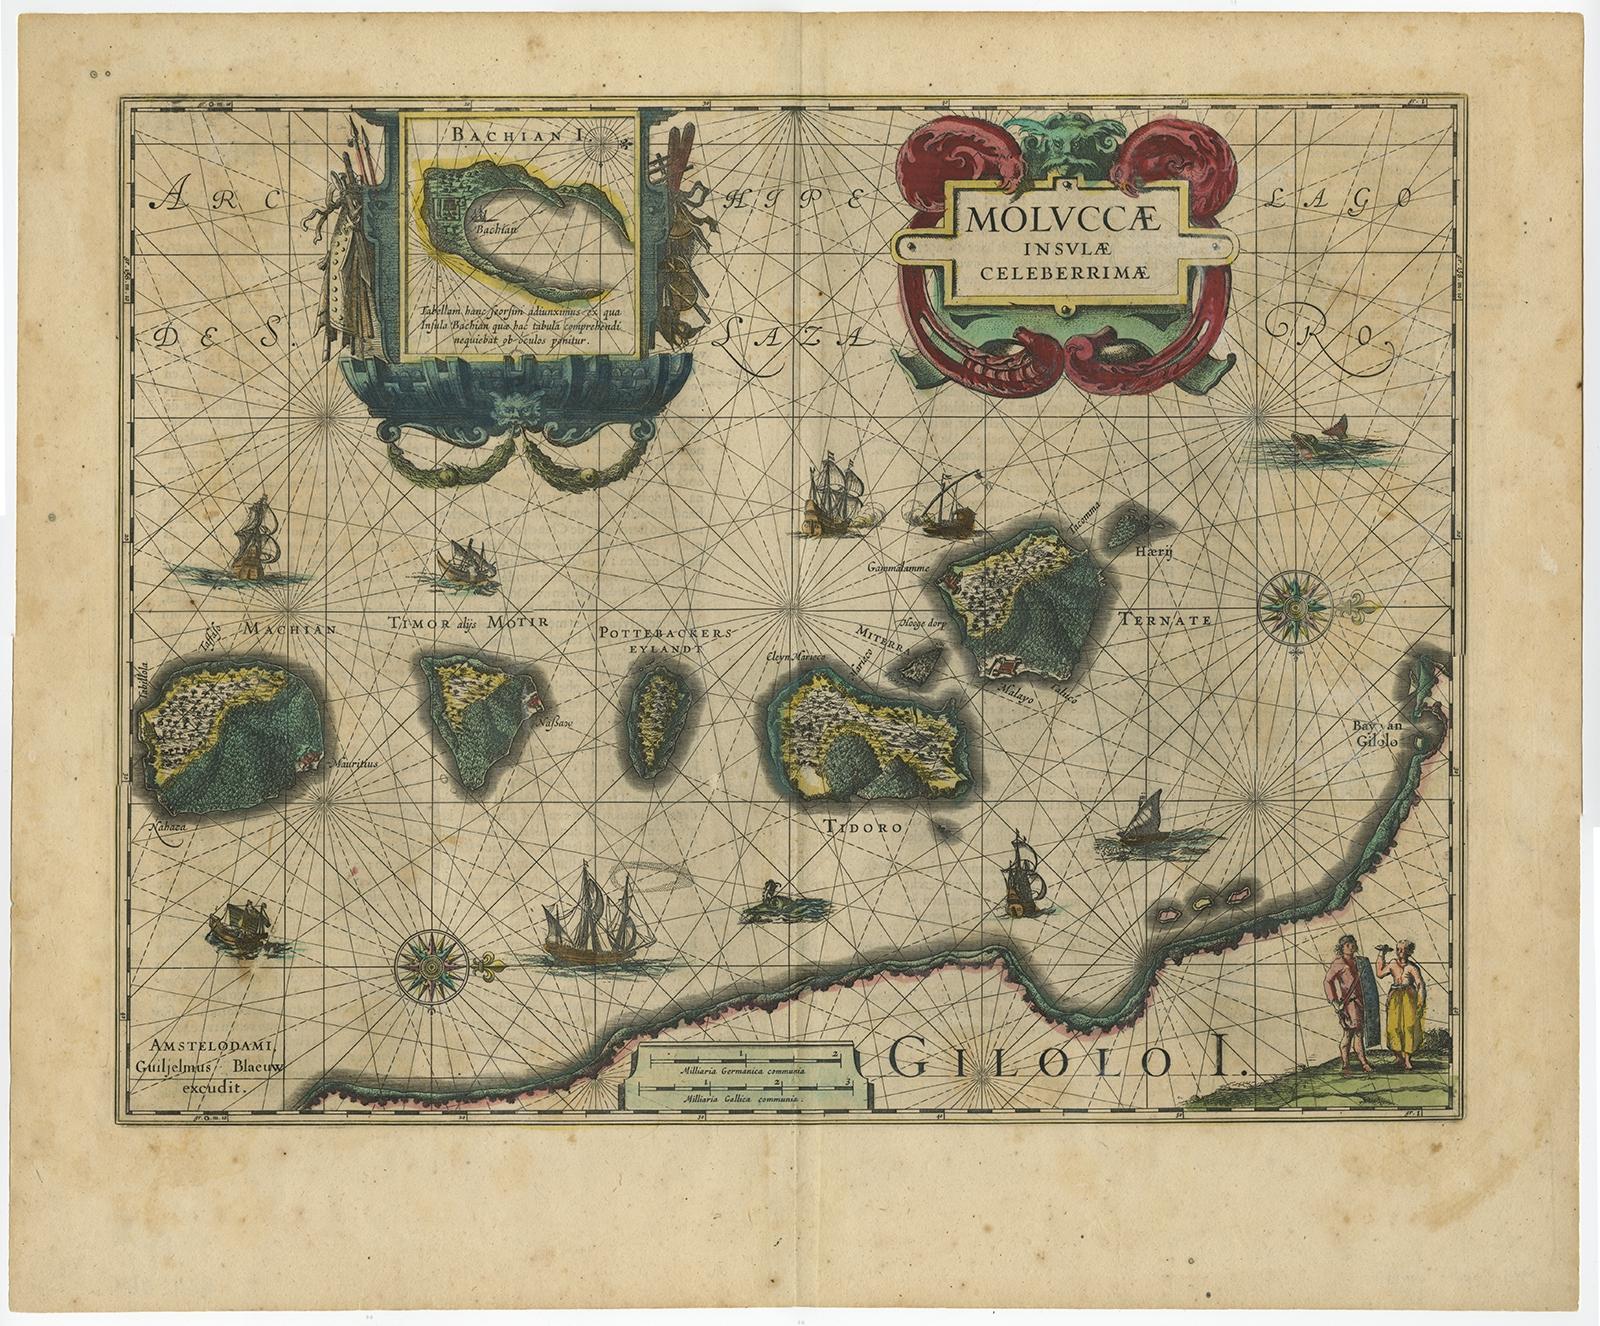 Antique map titled 'Moluccae Insulae Celeberrimae'. 

Decorative map of the Spice Islands. Inset of the Island of Bachian (Batjan) in an elaborate frame as well as a Moluccan couple in the lower right corner in Europeanized native